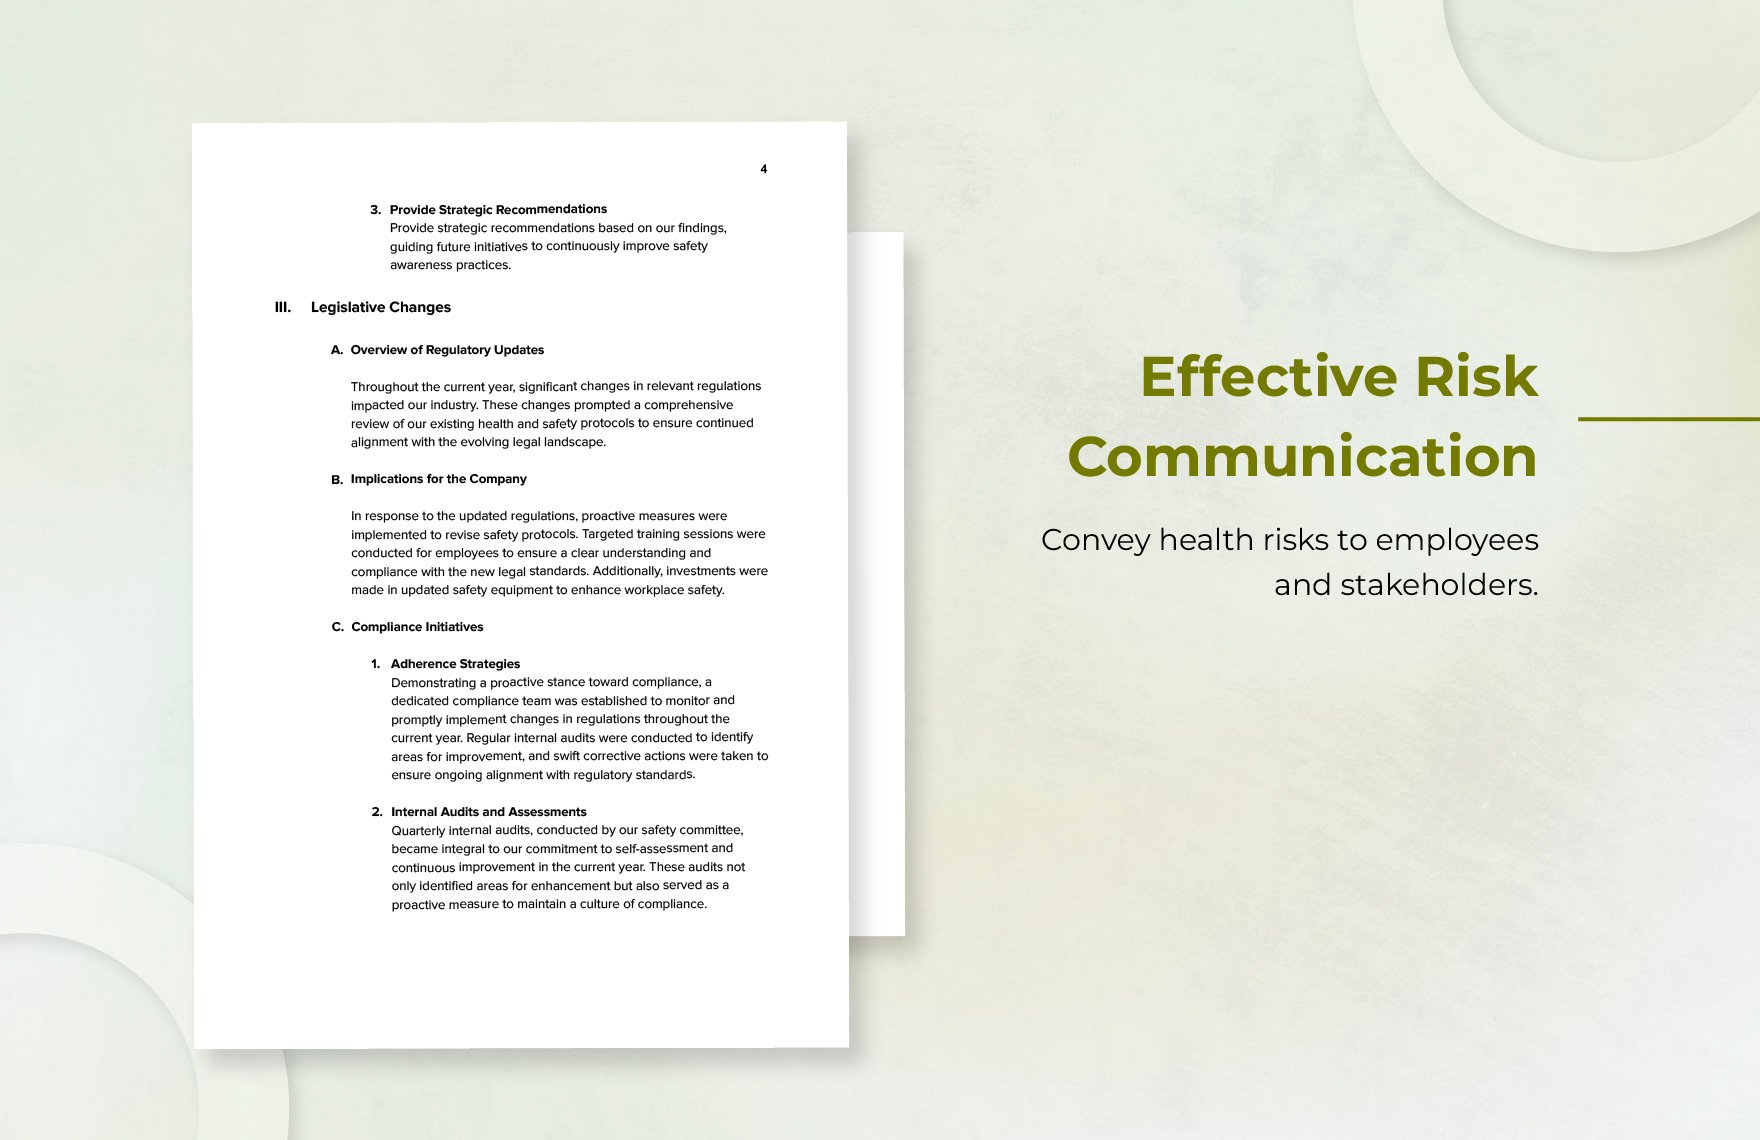 Annual Health & Safety Awareness Report Template